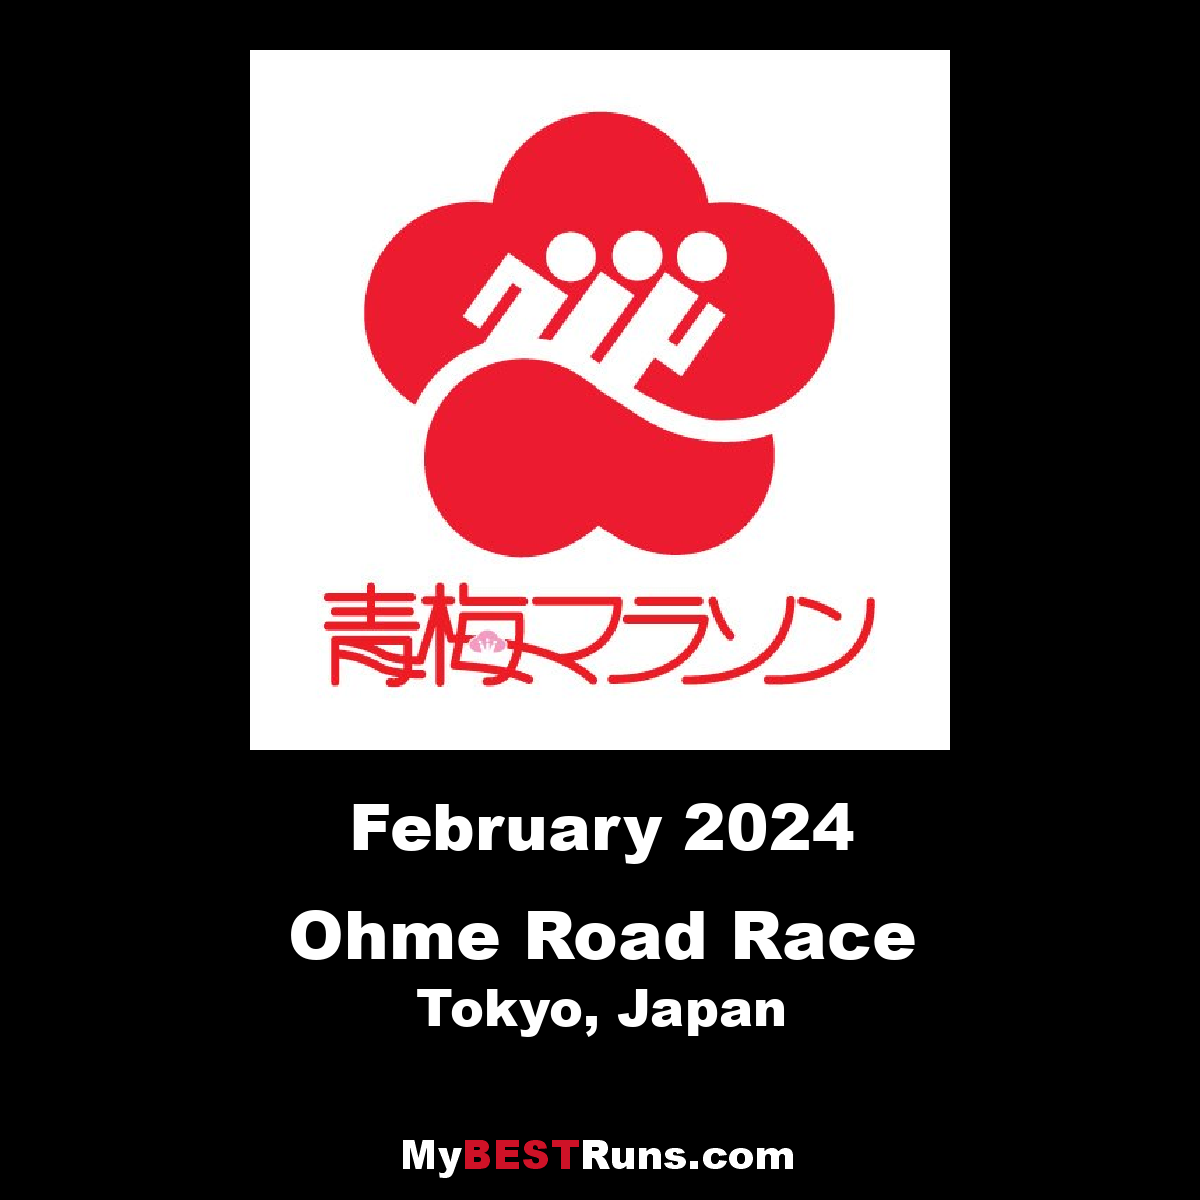 Ohme Road Race